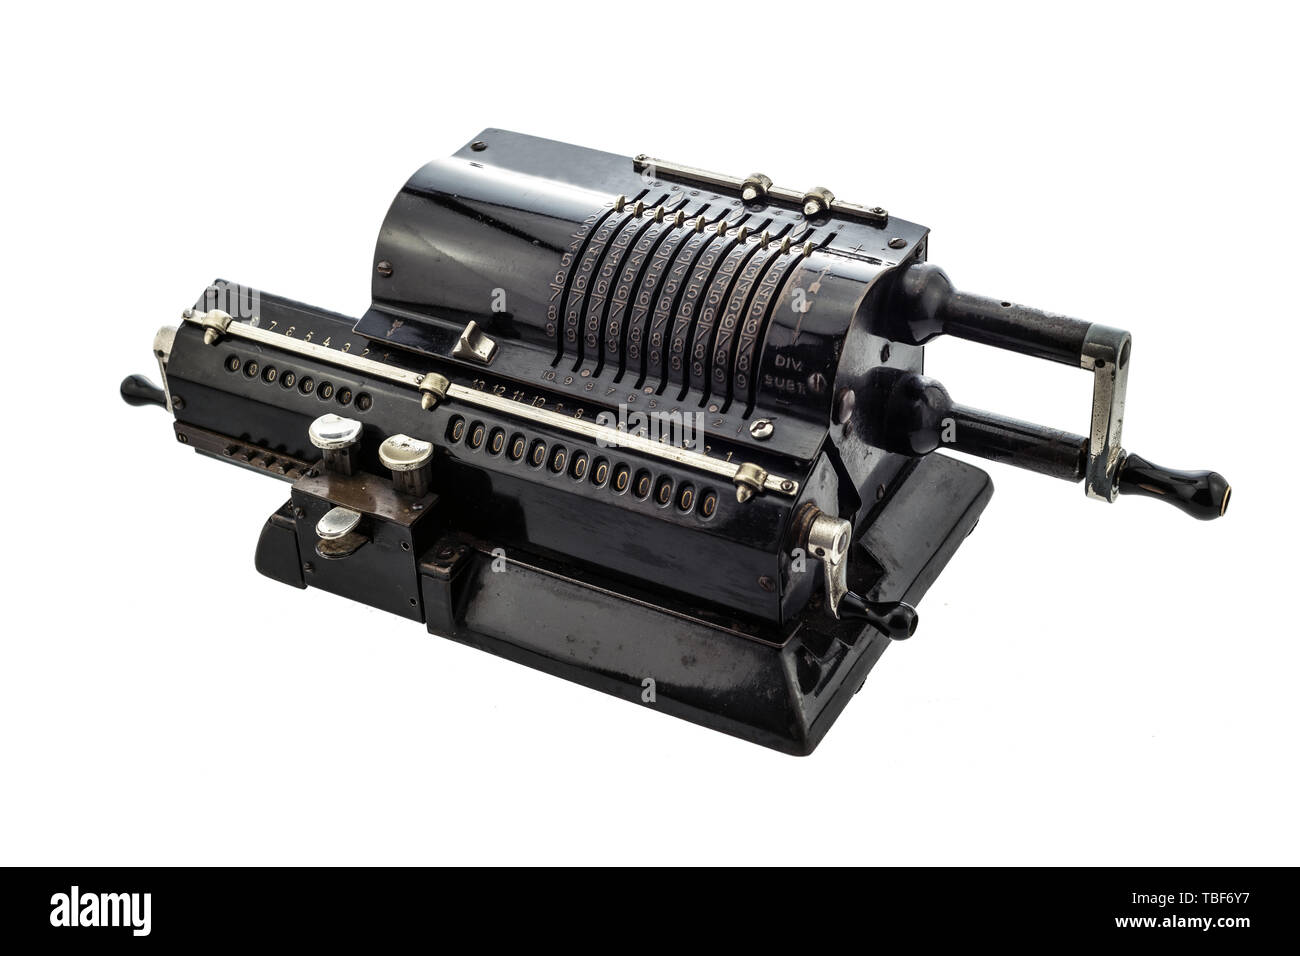 Ancient pinwheel mechanical calculator.The calculating machine, is a mechanical device used to perform automatically the basic operations of arithmeti Stock Photo